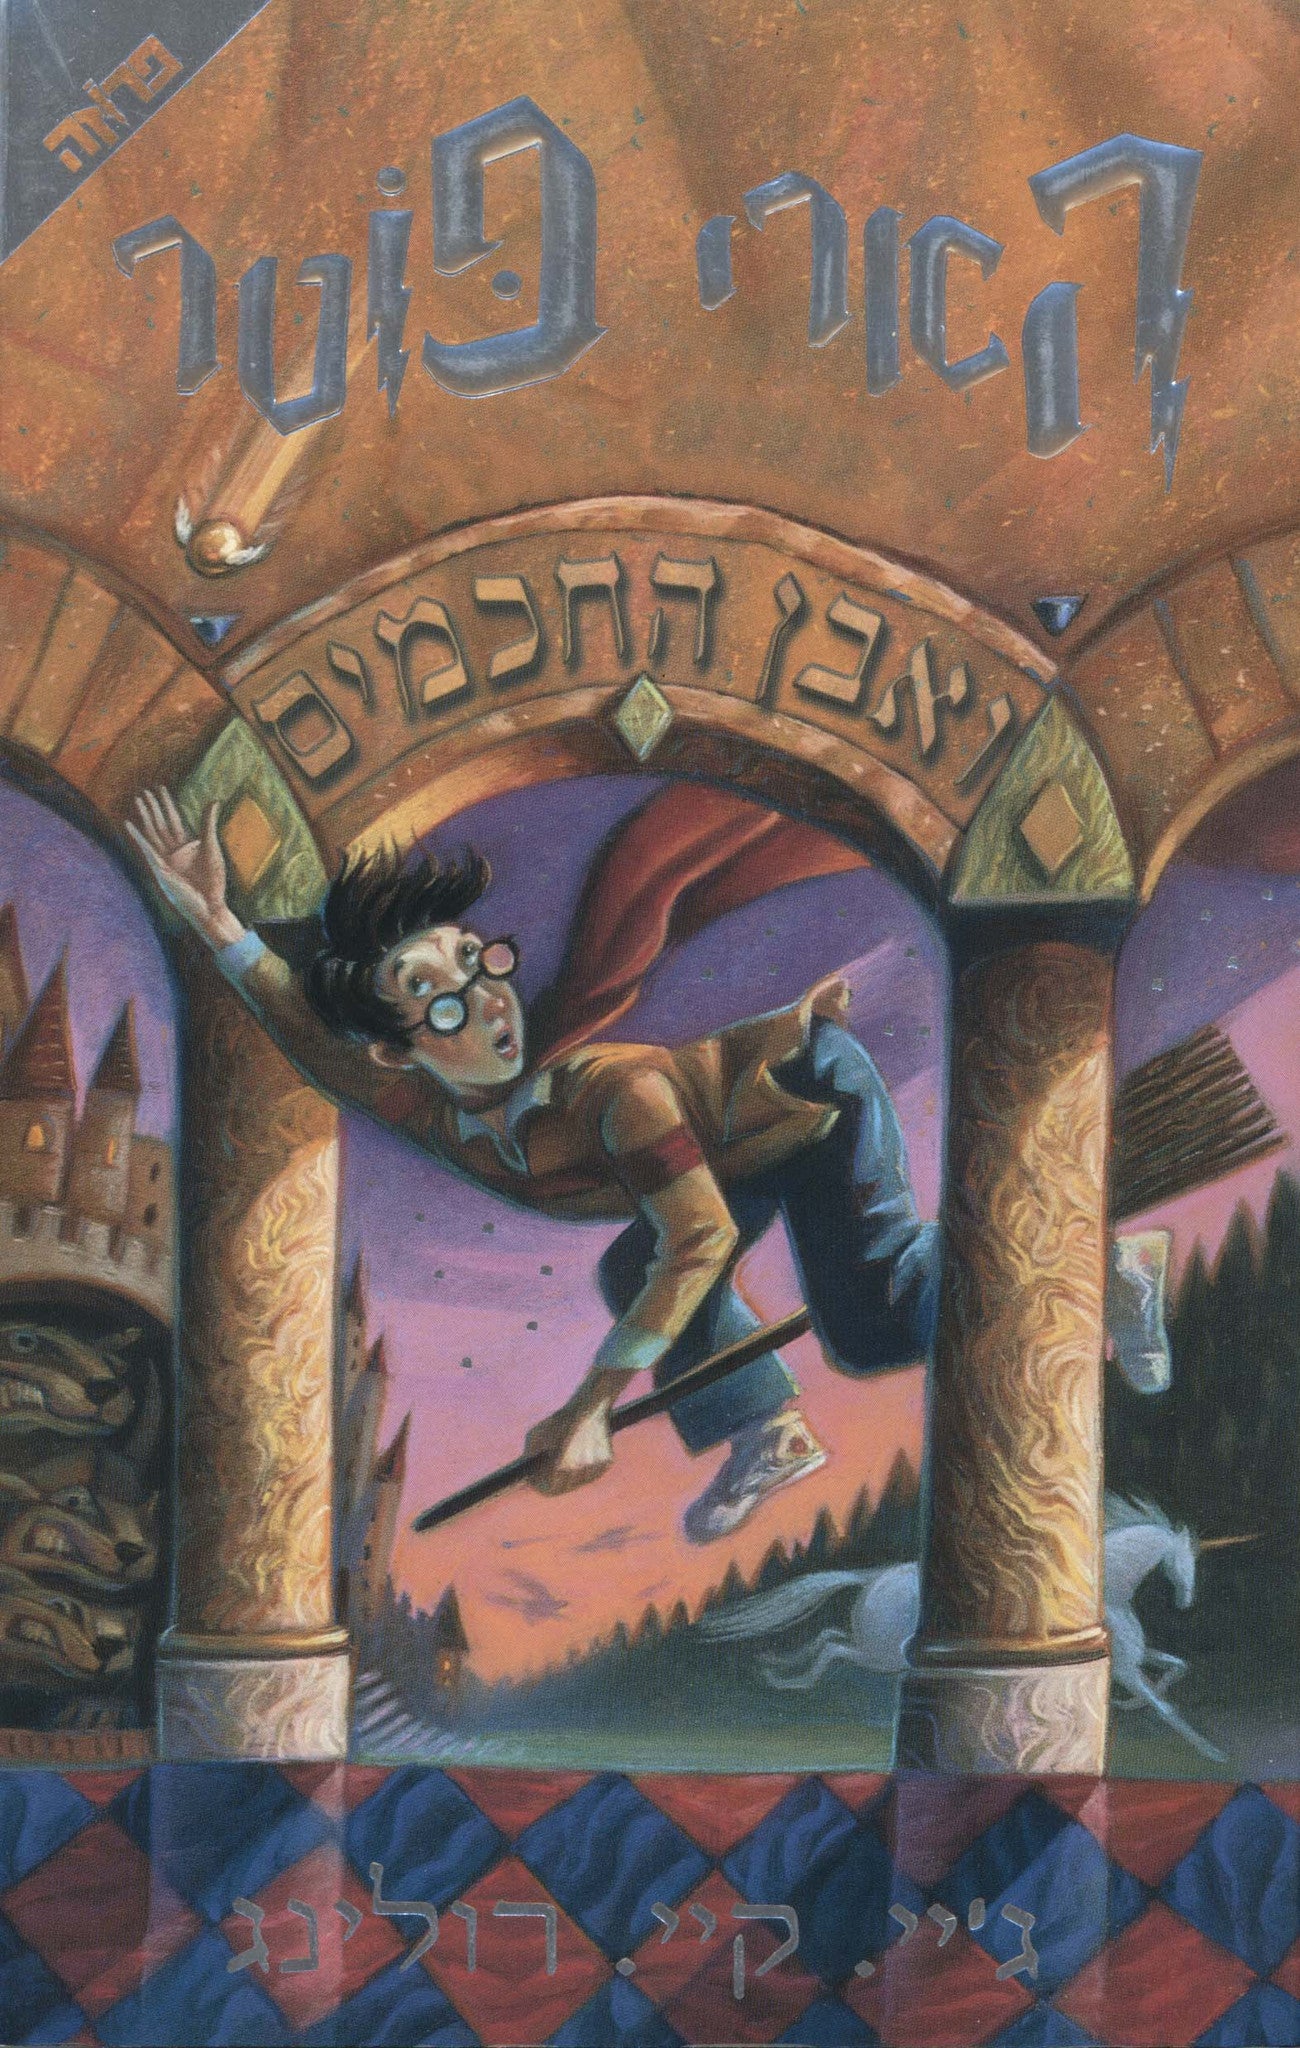 Harry Potter And The Sorcerer's Stone By J. K. Rowling (paperback